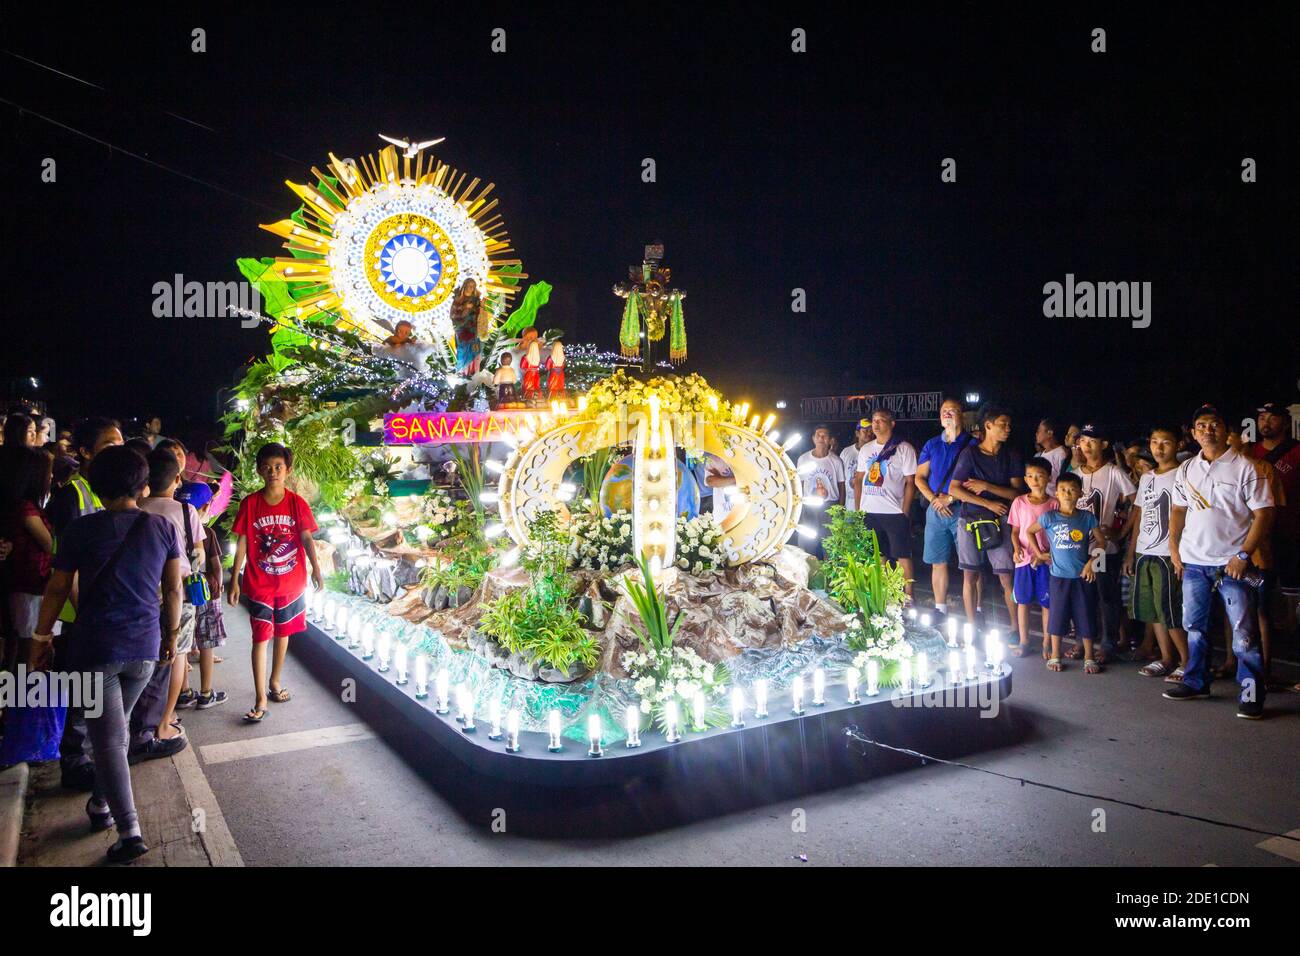 Colorful religious festival floats parade the streets during the Tapusan Festival in Alitagtag, Batangas, Philippines Stock Photo